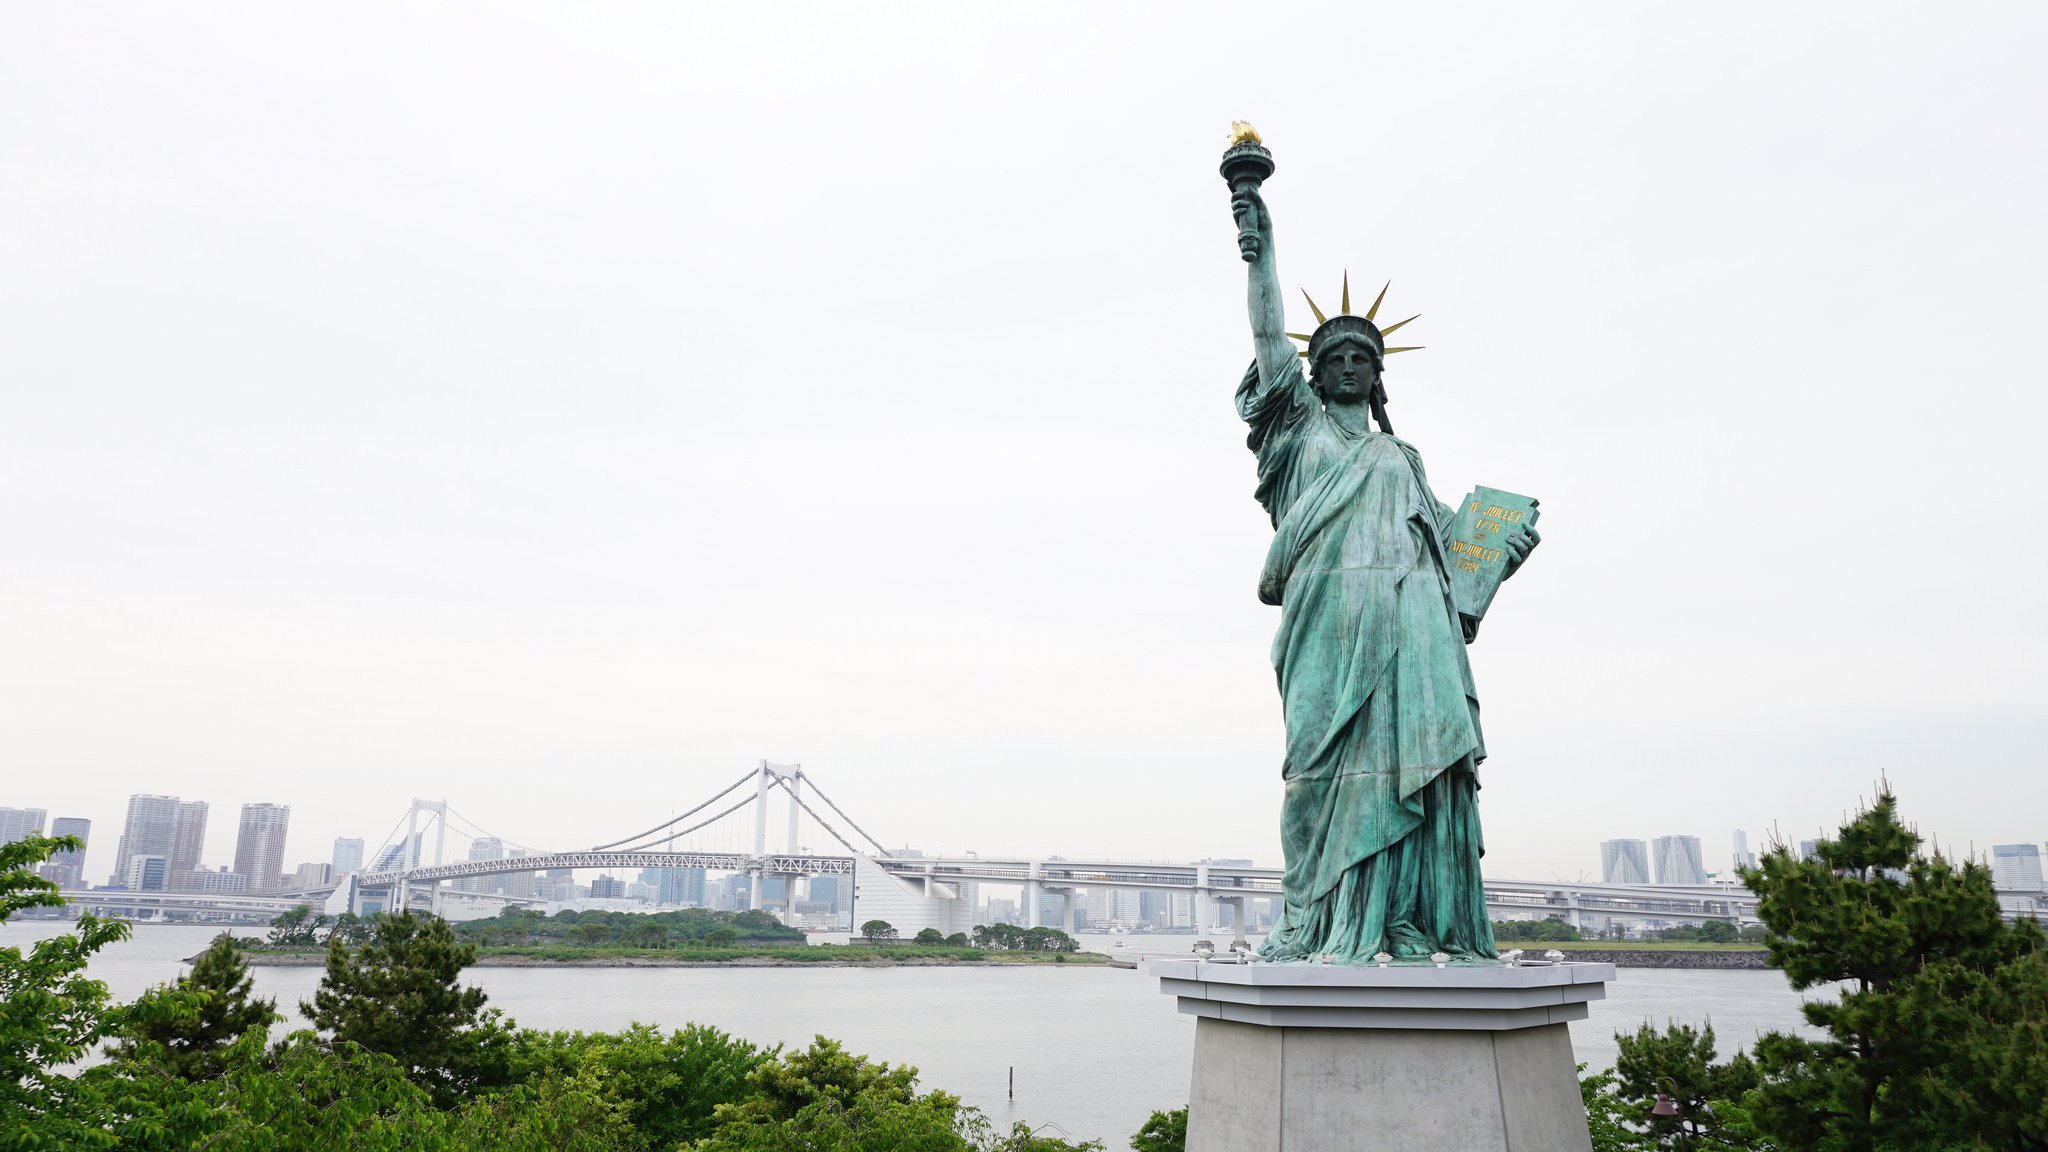 There’s even a Statue of Liberty in Tokyo!